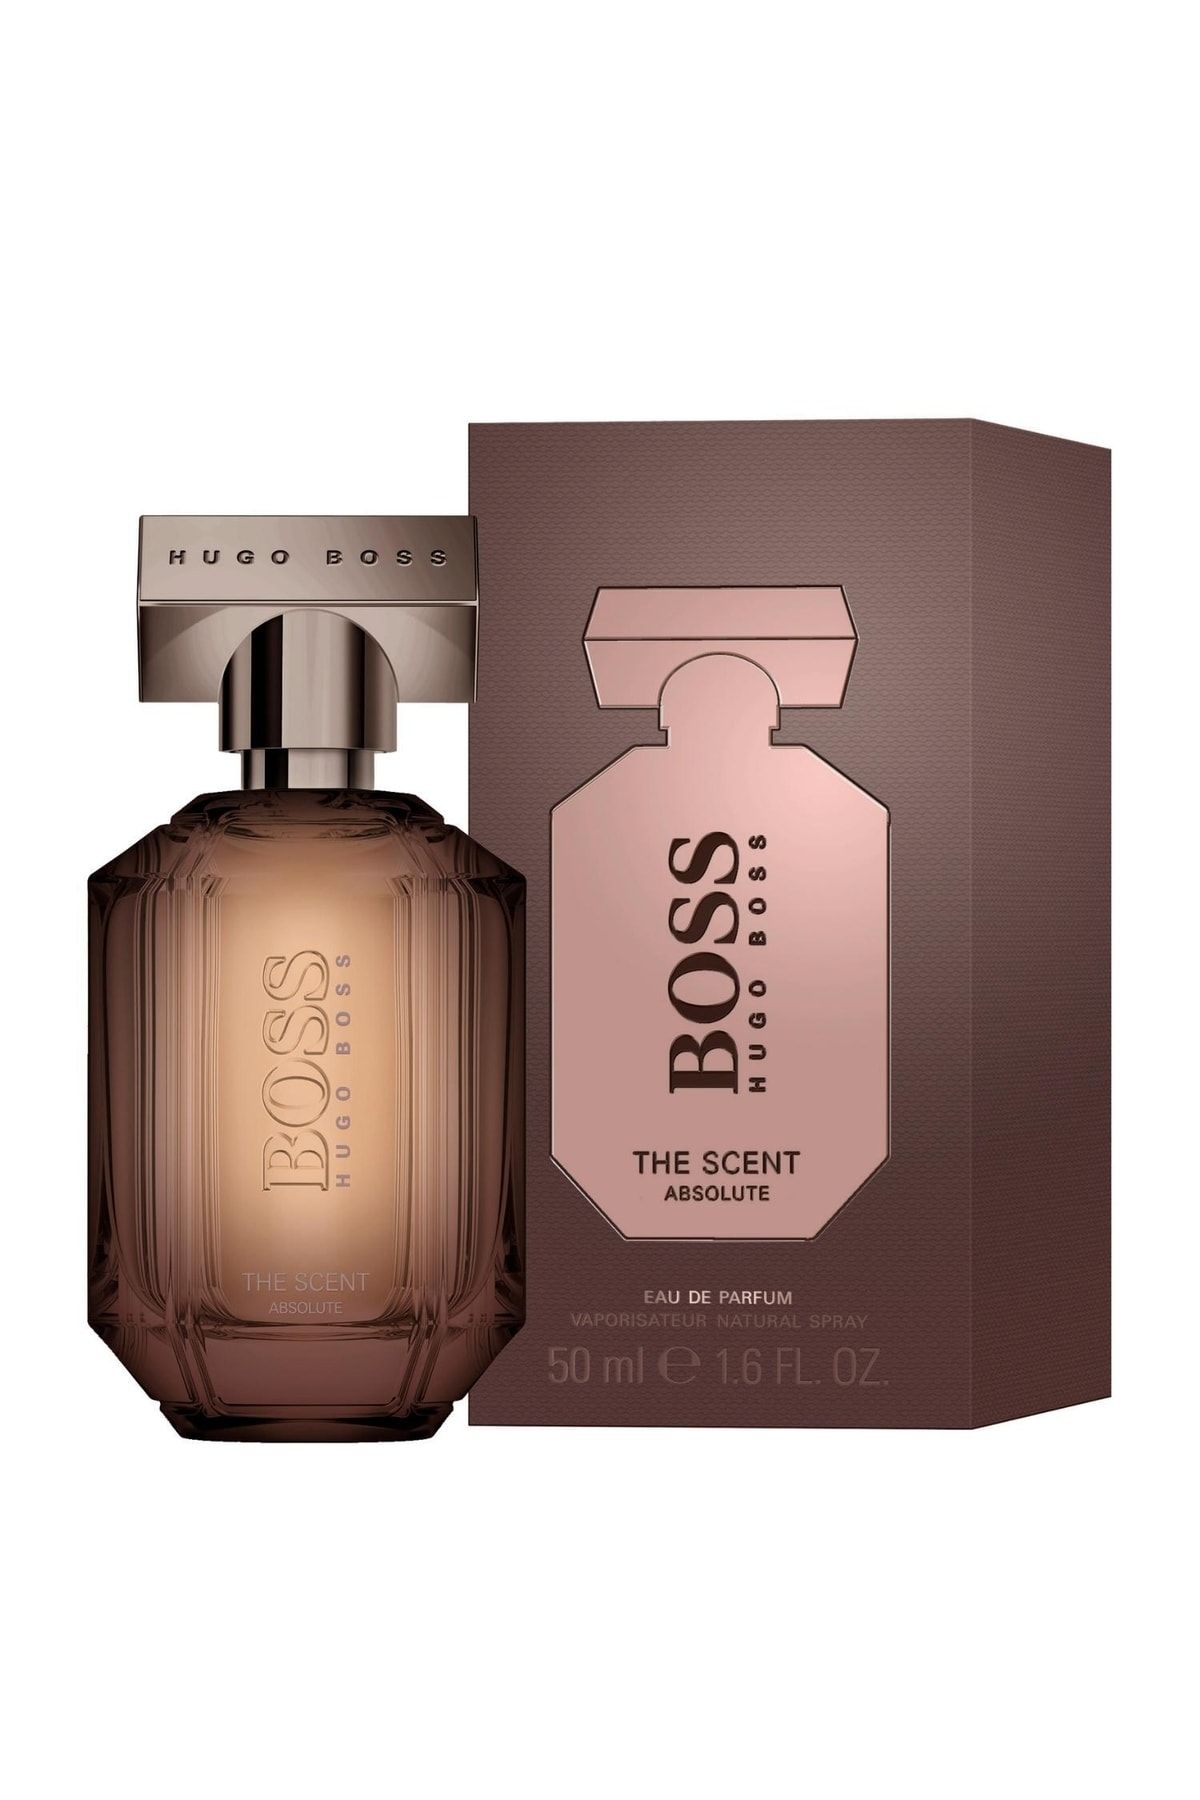 The scent absolute. Boss the Scent for her Hugo Boss. Hugo Boss духи женские the Scent. Hugo Boss the Scent absolute for her. Hugo Boss the Scent for her 50 ml.